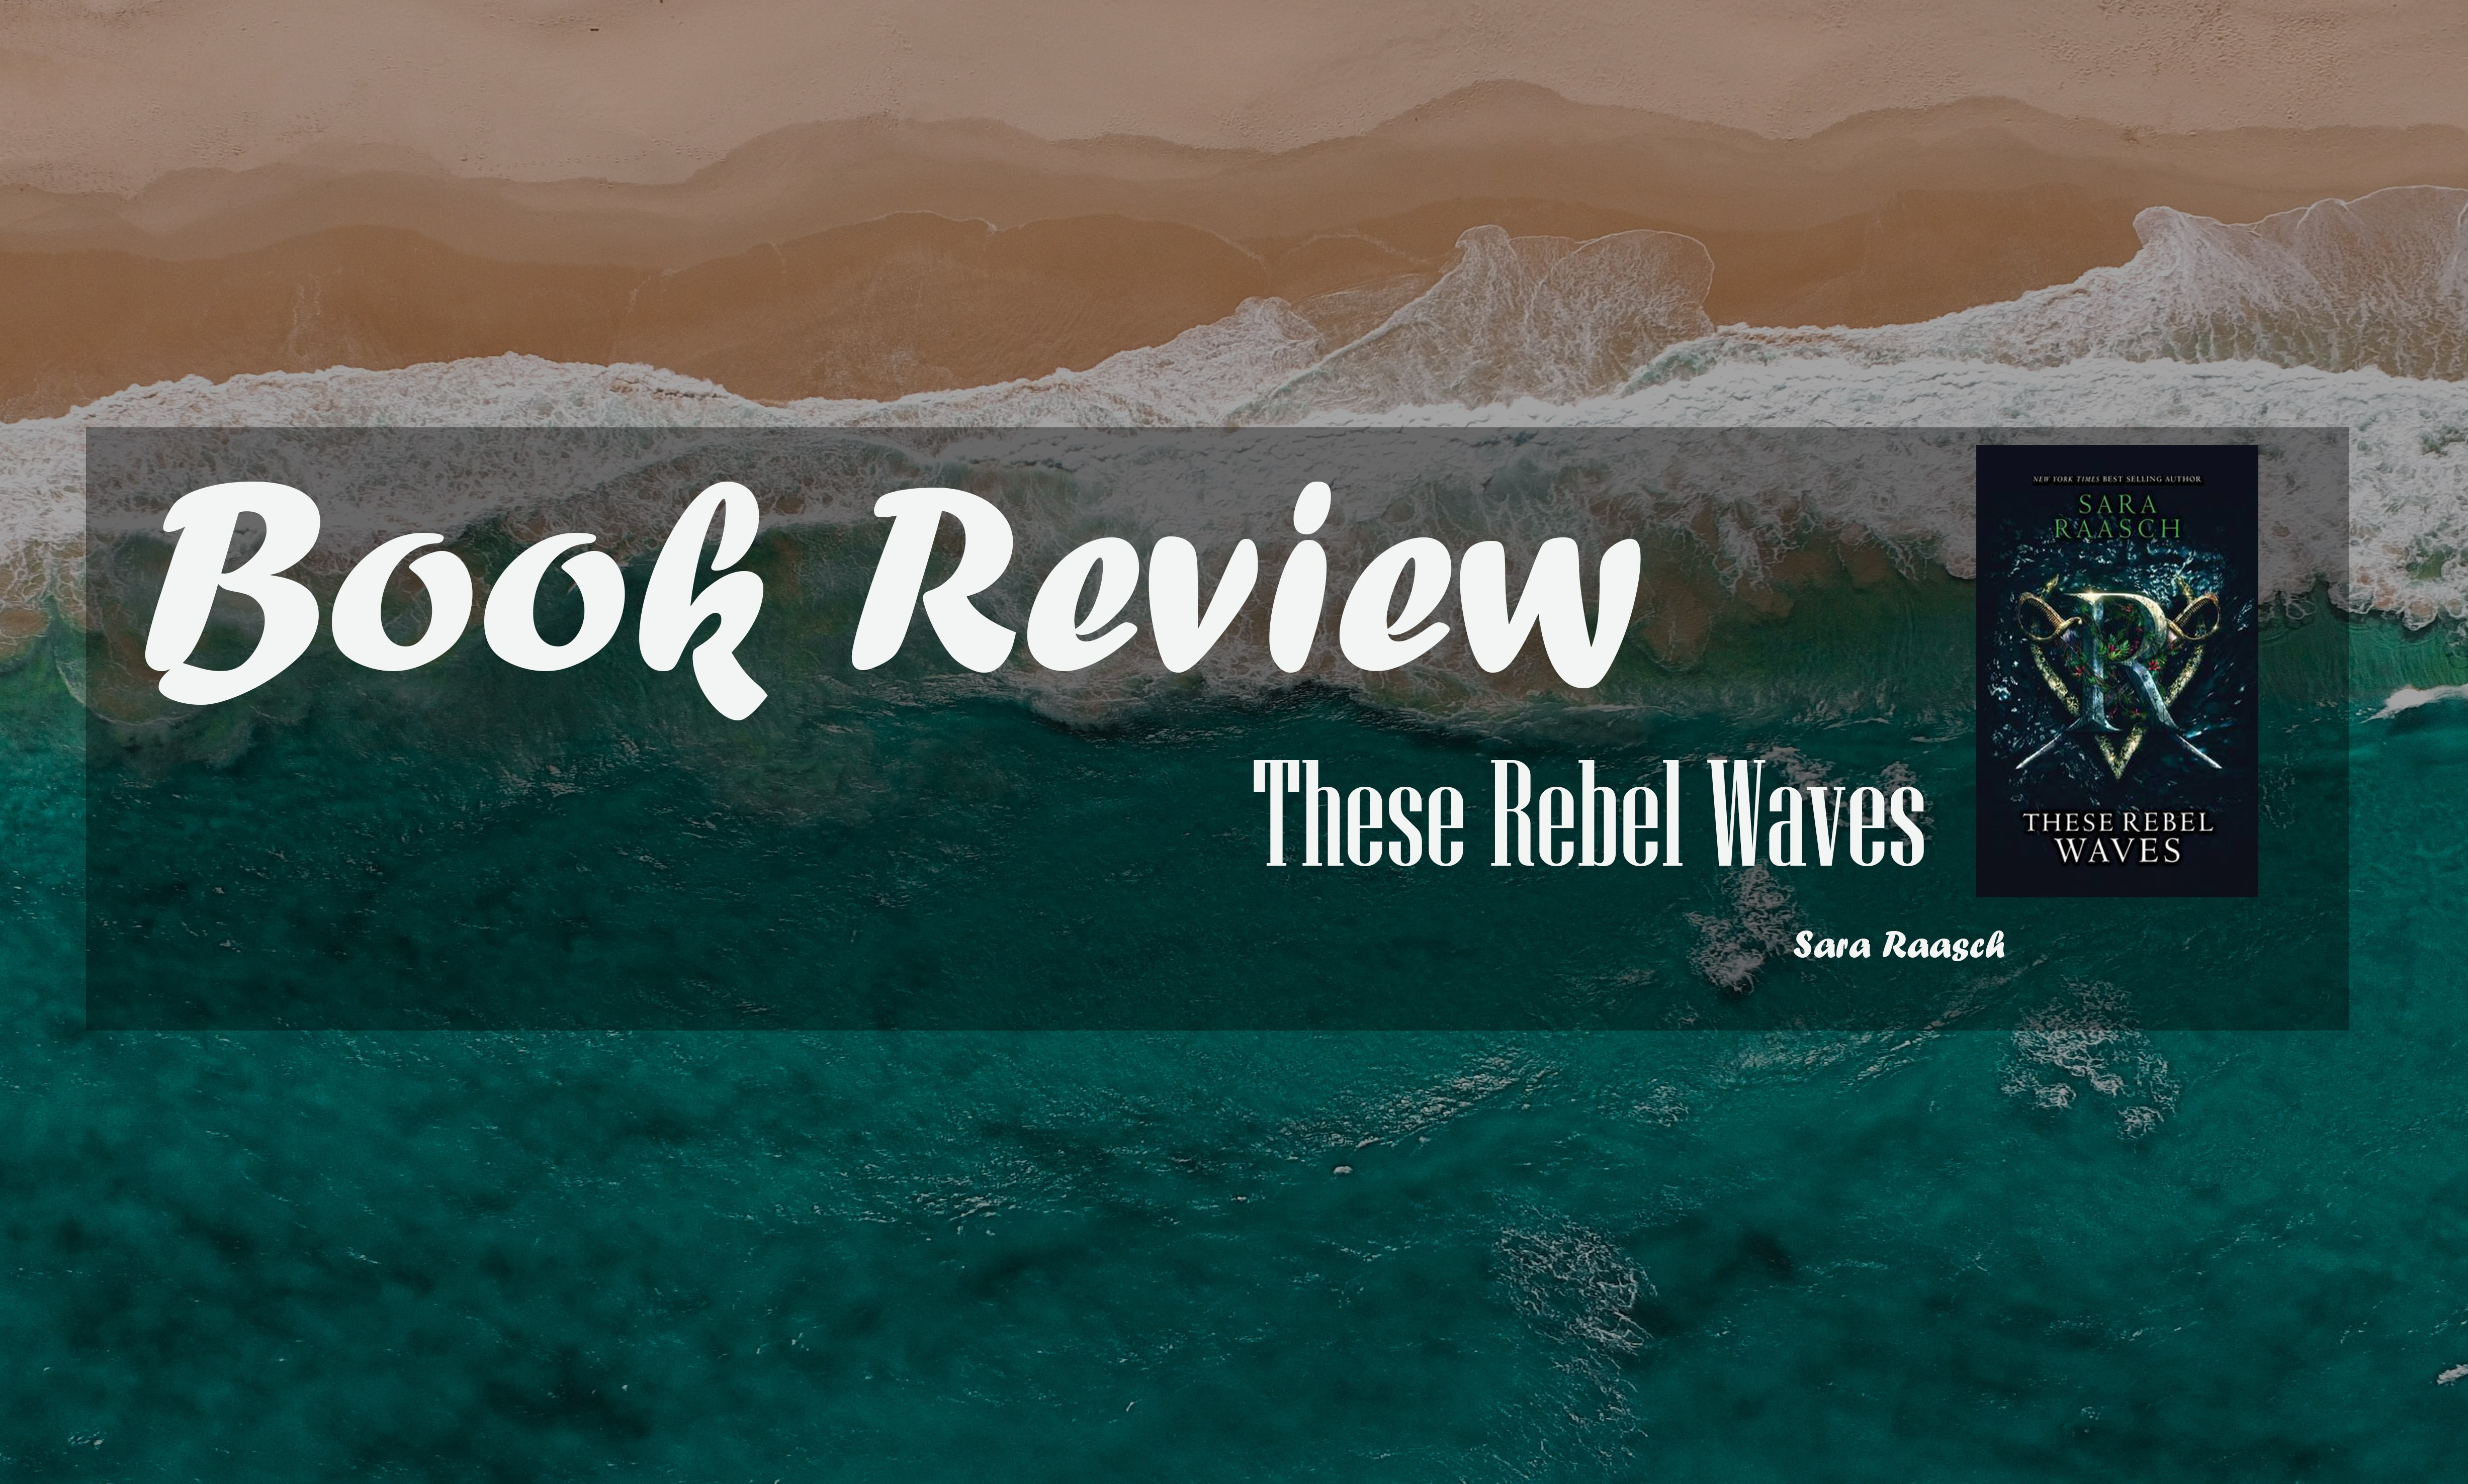 Book Review: These Rebel Waves by Sara Raasch